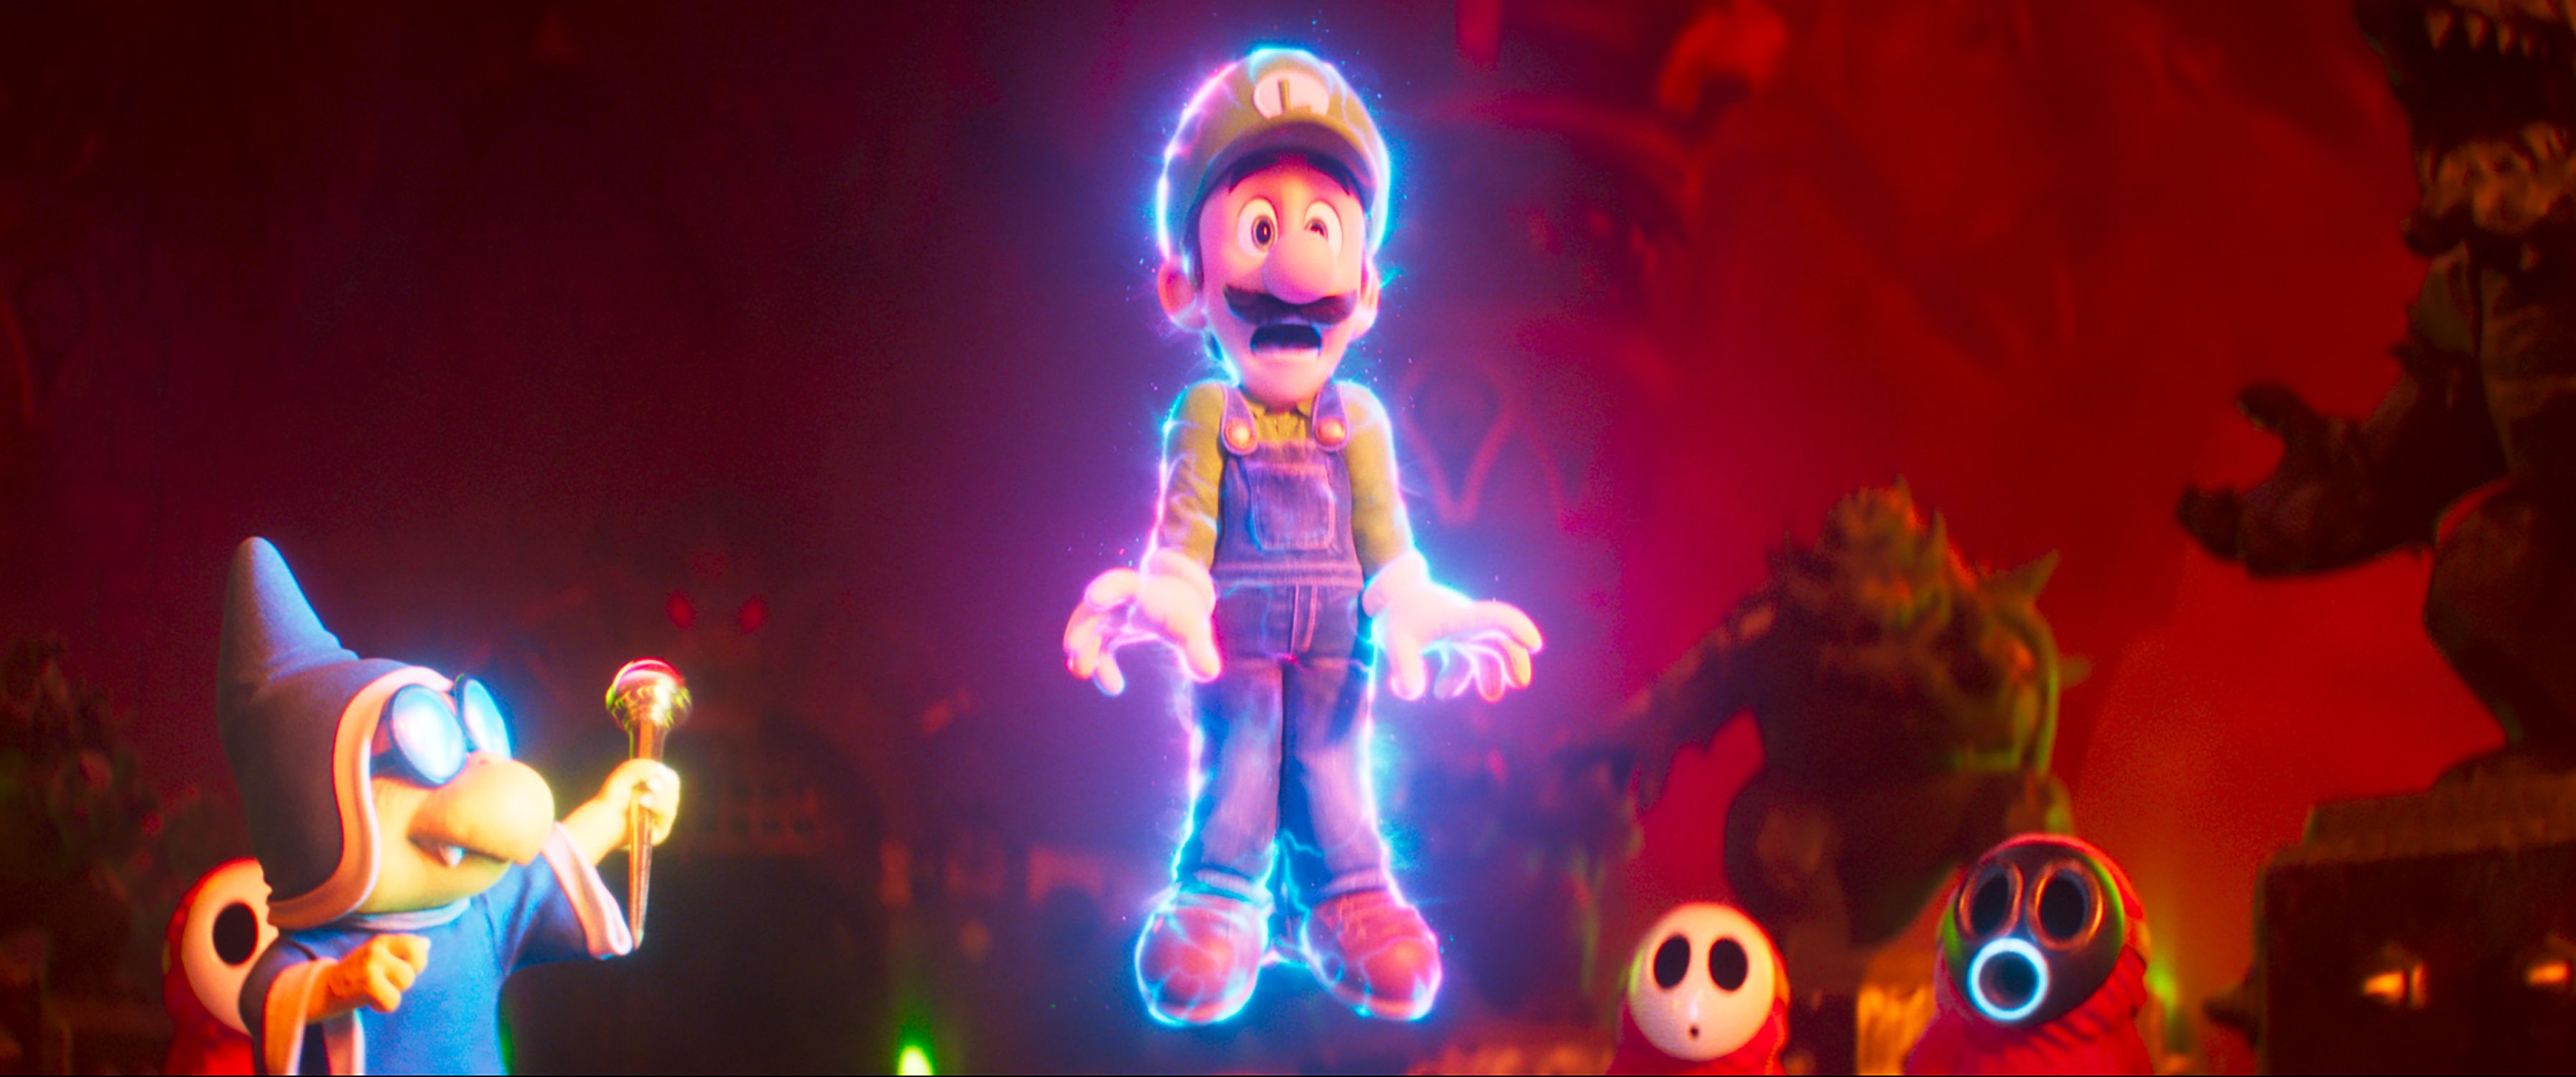 Charlie Day Confirms Interest in Starring in a Luigi's Mansion